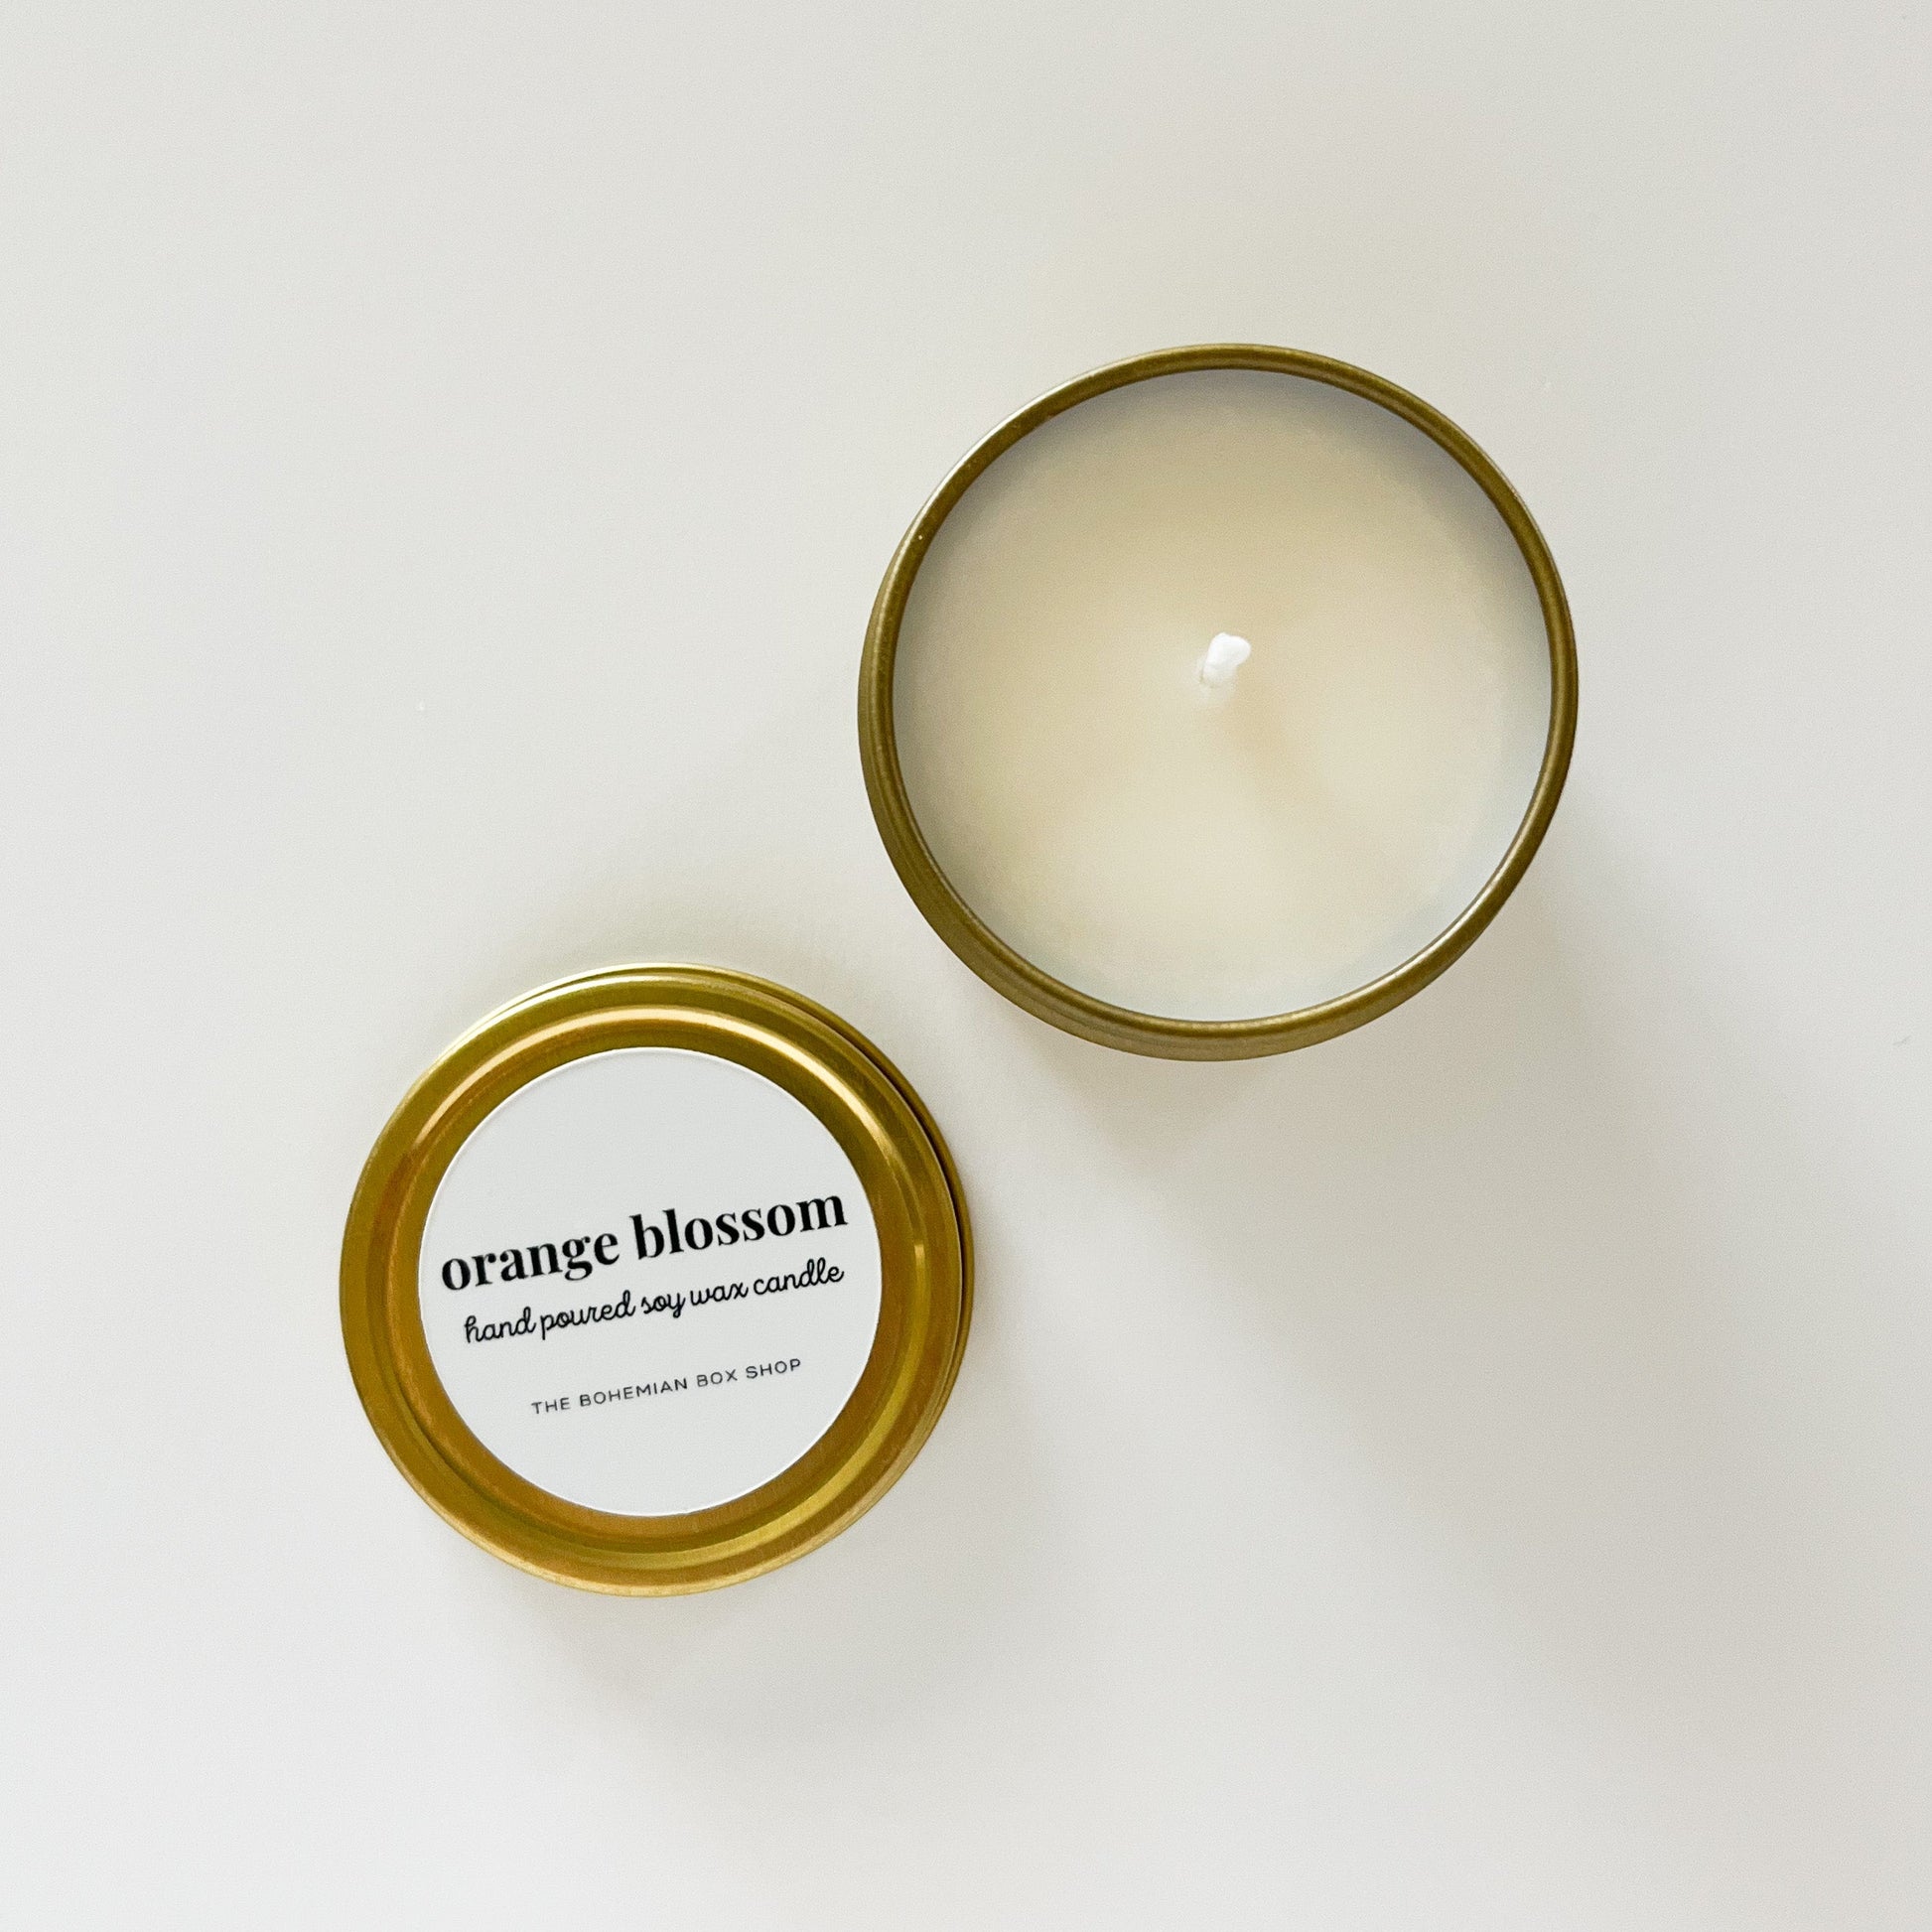 2 ounce orange blossom, hand poured soy candle, in gold tin and white label. ￼